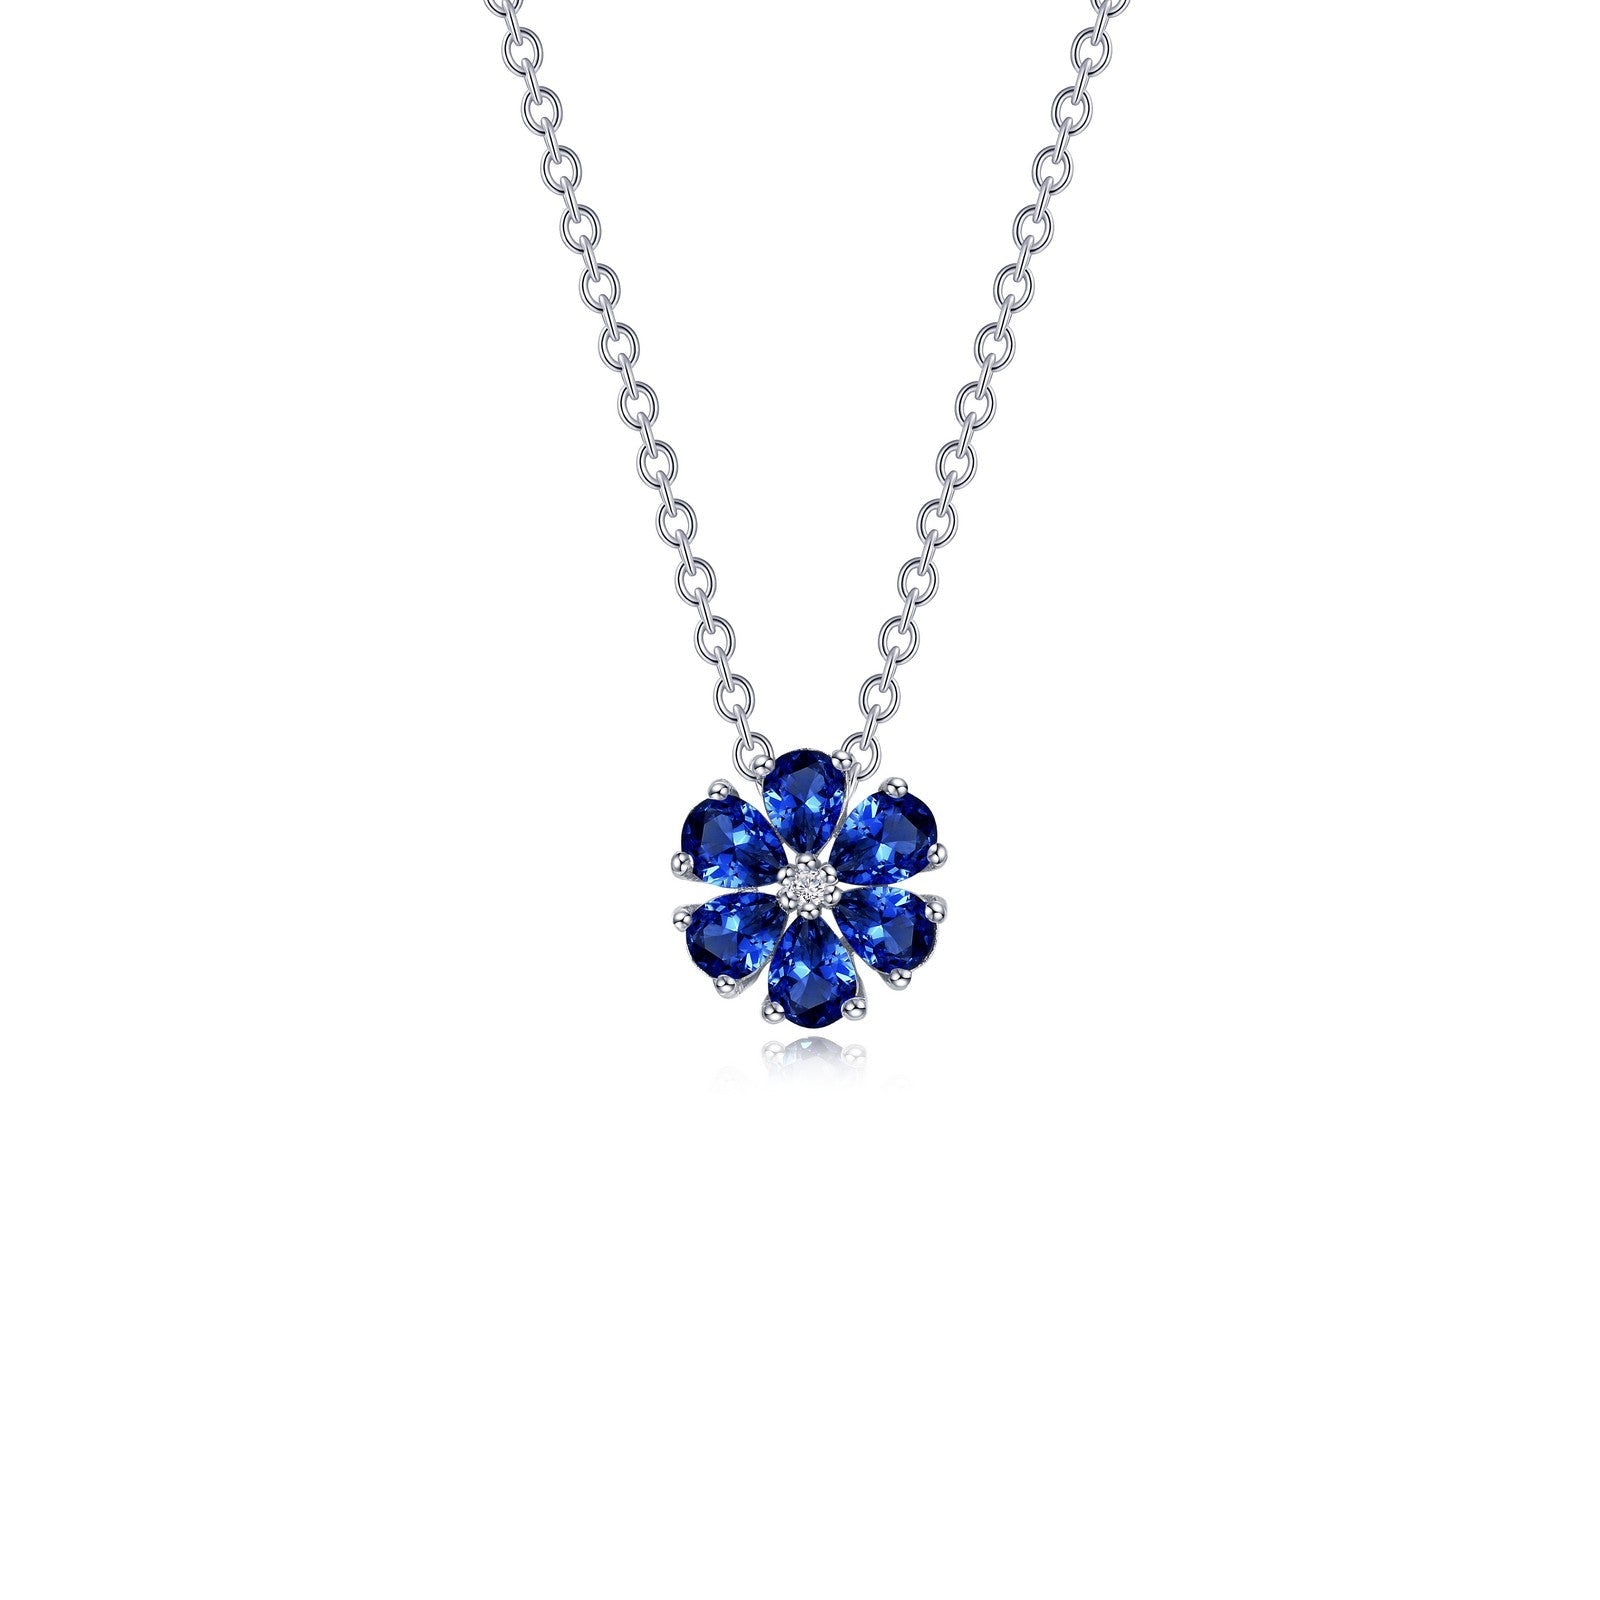 Fancy Lab-Grown Sapphire Flower Necklace-SYP007SP